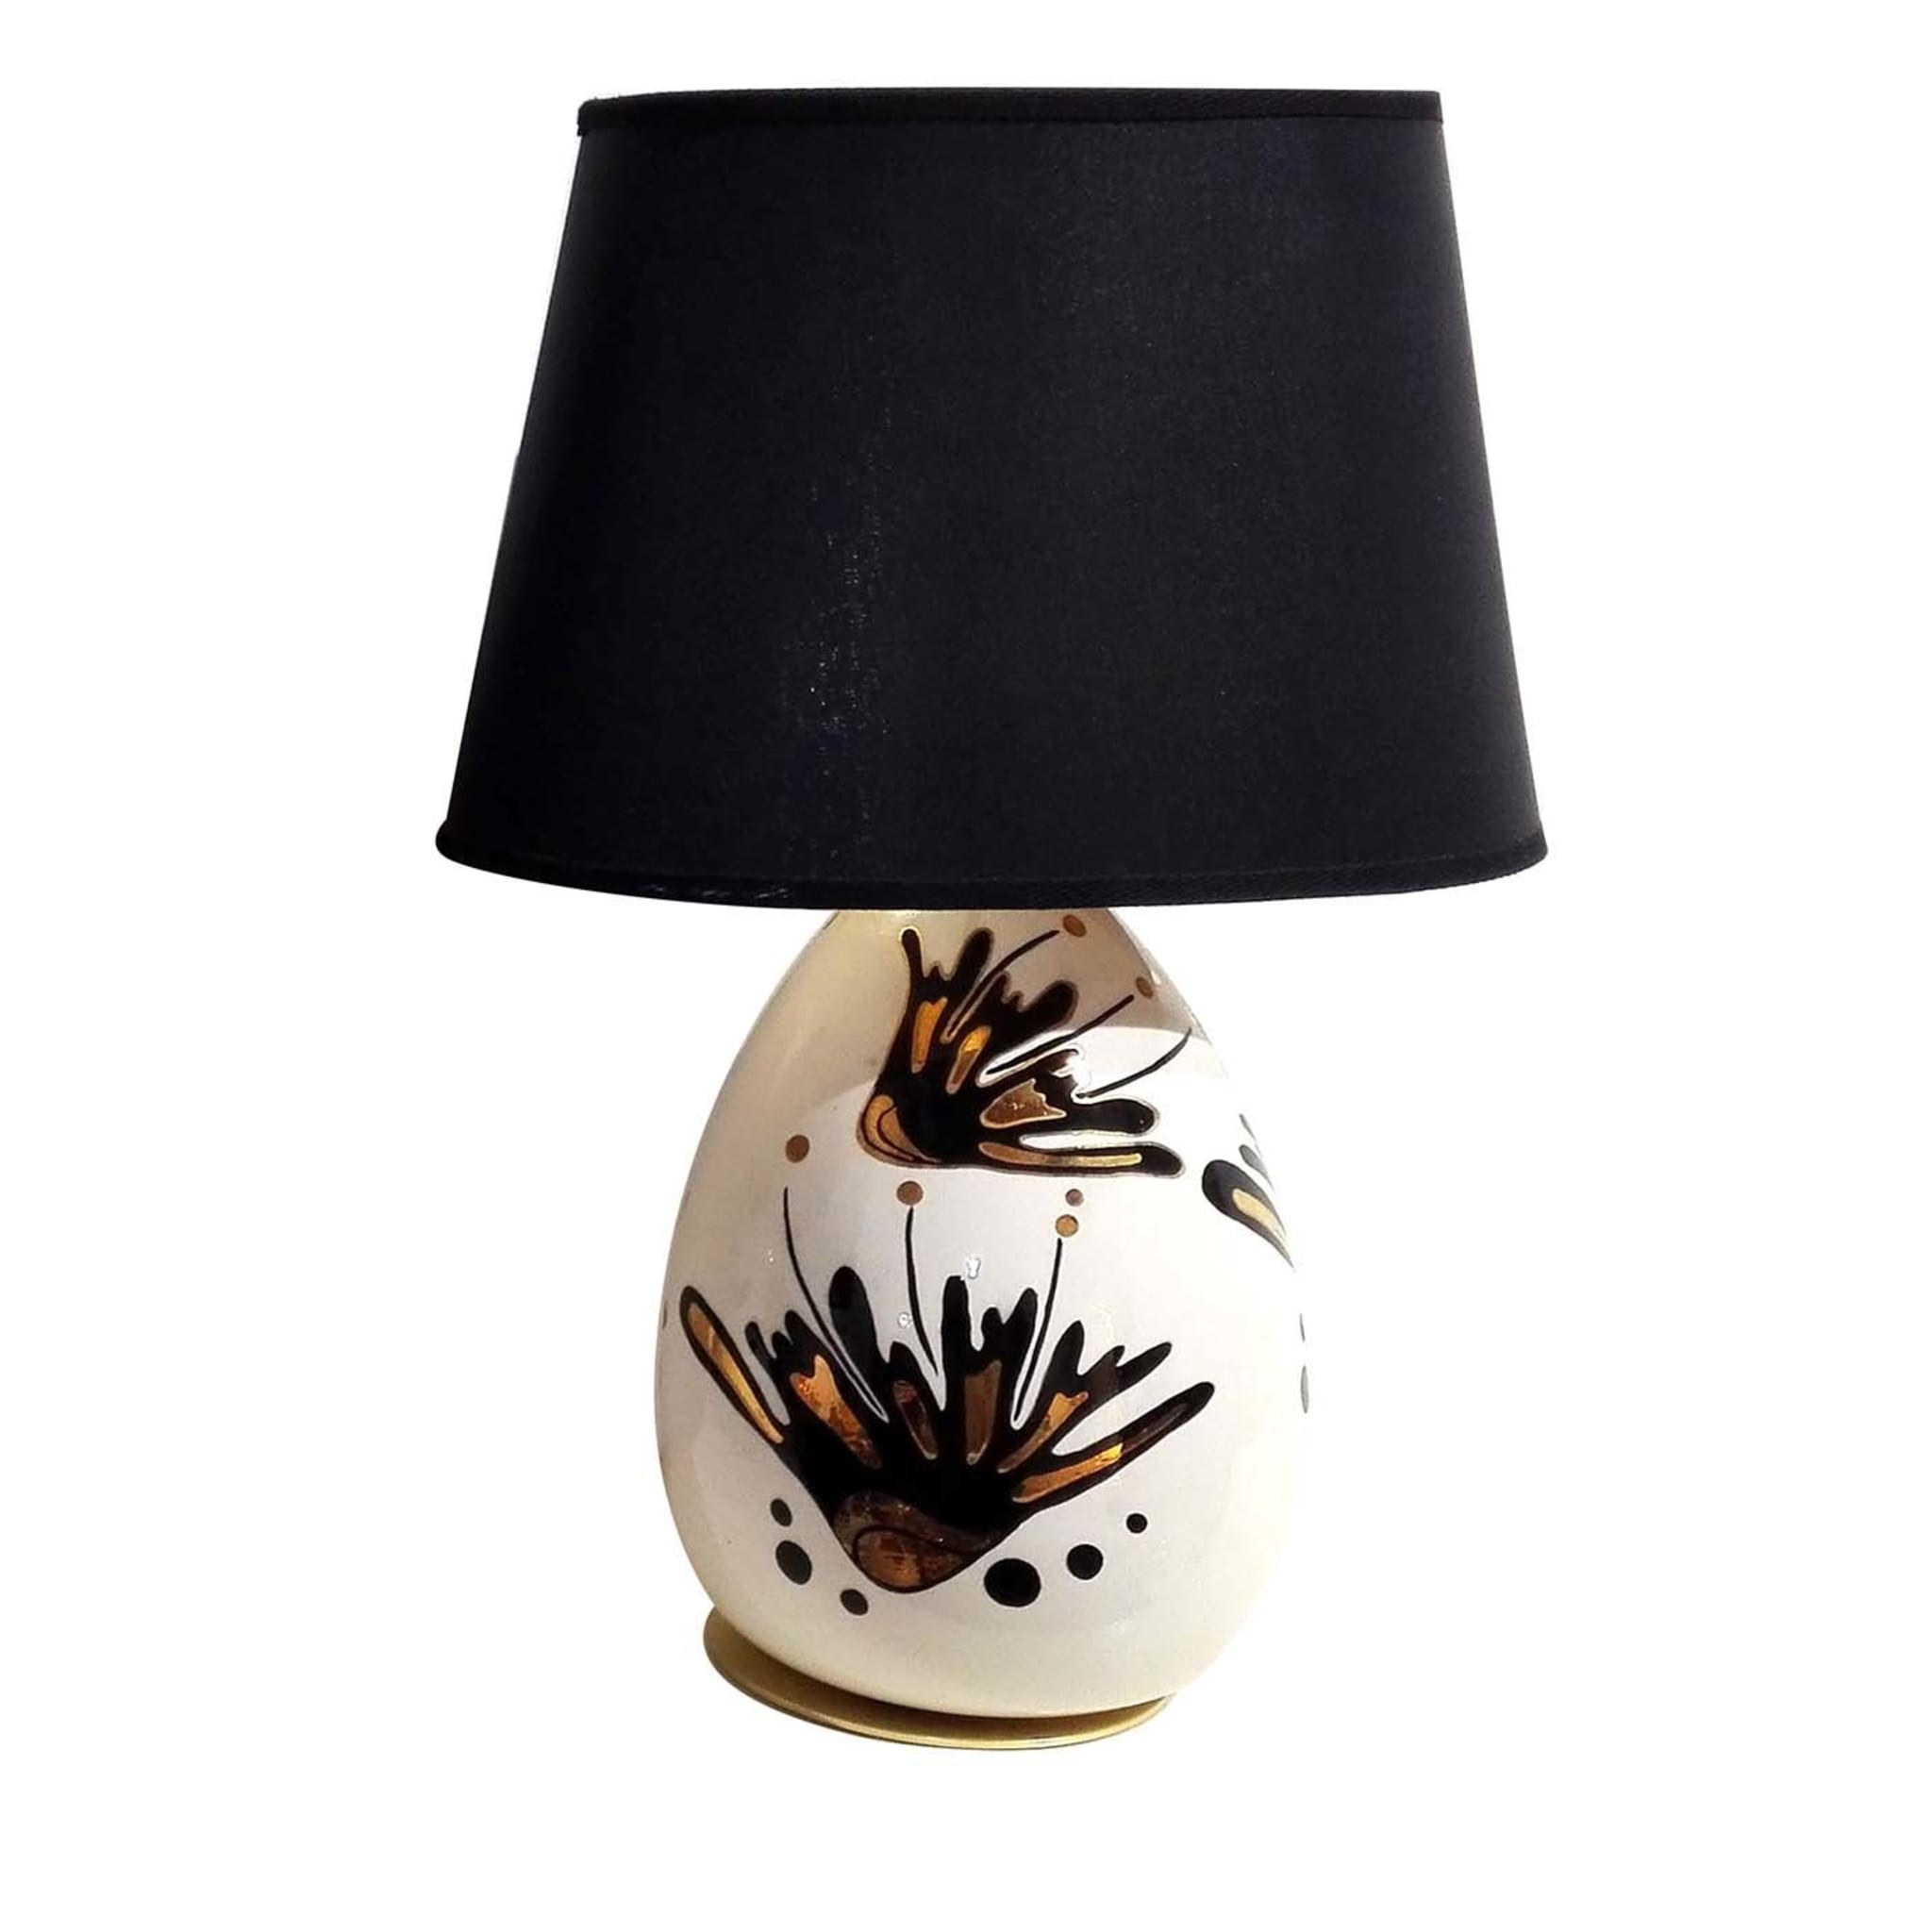 Set of 2 Handpainted Table Lamps - Main view